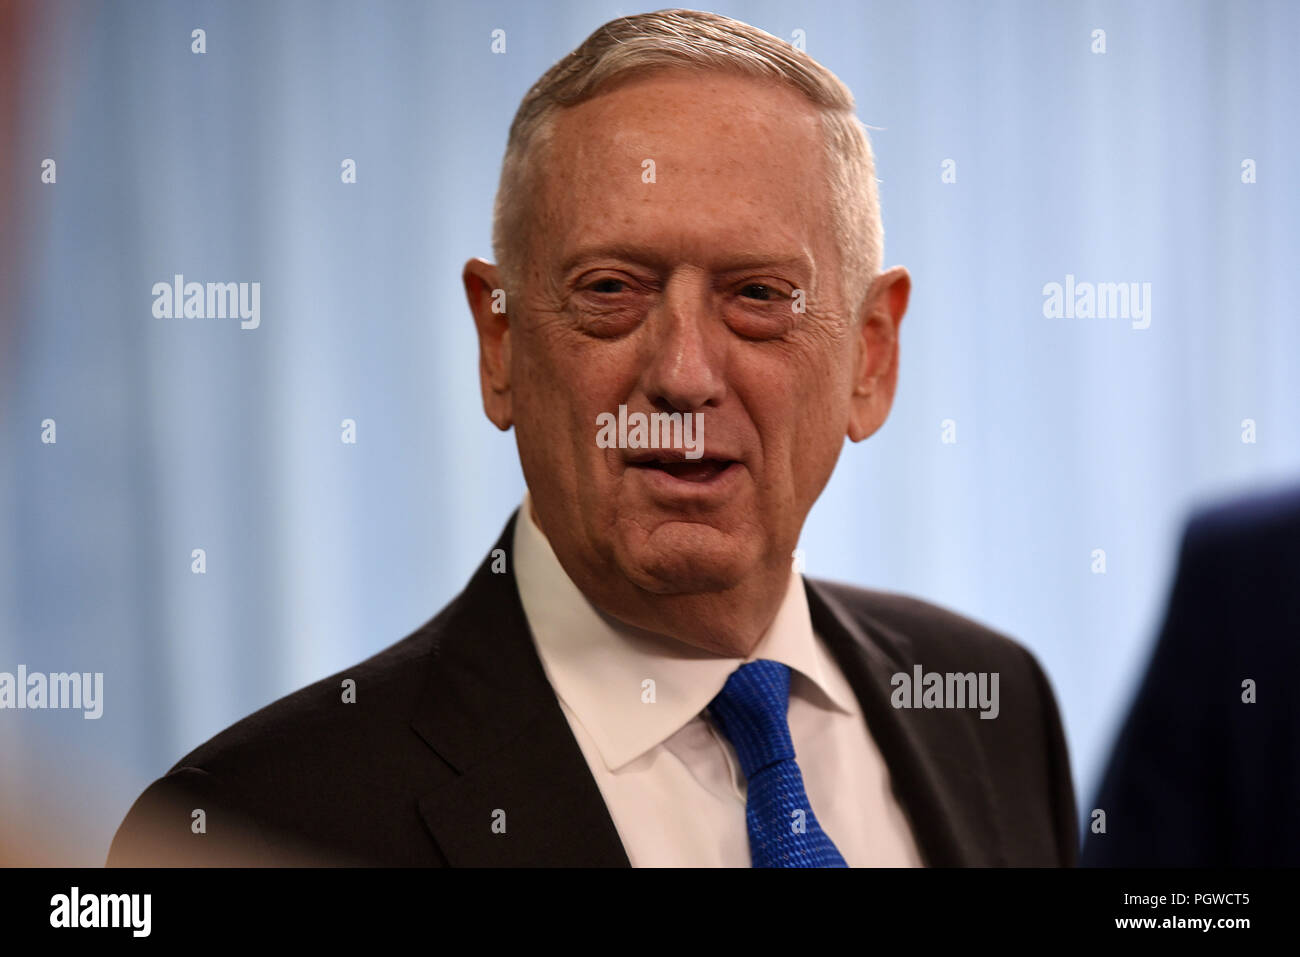 U.S. Secretary of Defense James N. Mattis greets reporters before a joint press conference with the chairman of the Joint Chiefs of Staff, Marine Corps Gen. Joseph F. Dunford, at the Pentagon, Arlington, Va., Aug. 28, 2018. DoD photo by Lisa Ferdinando Stock Photo